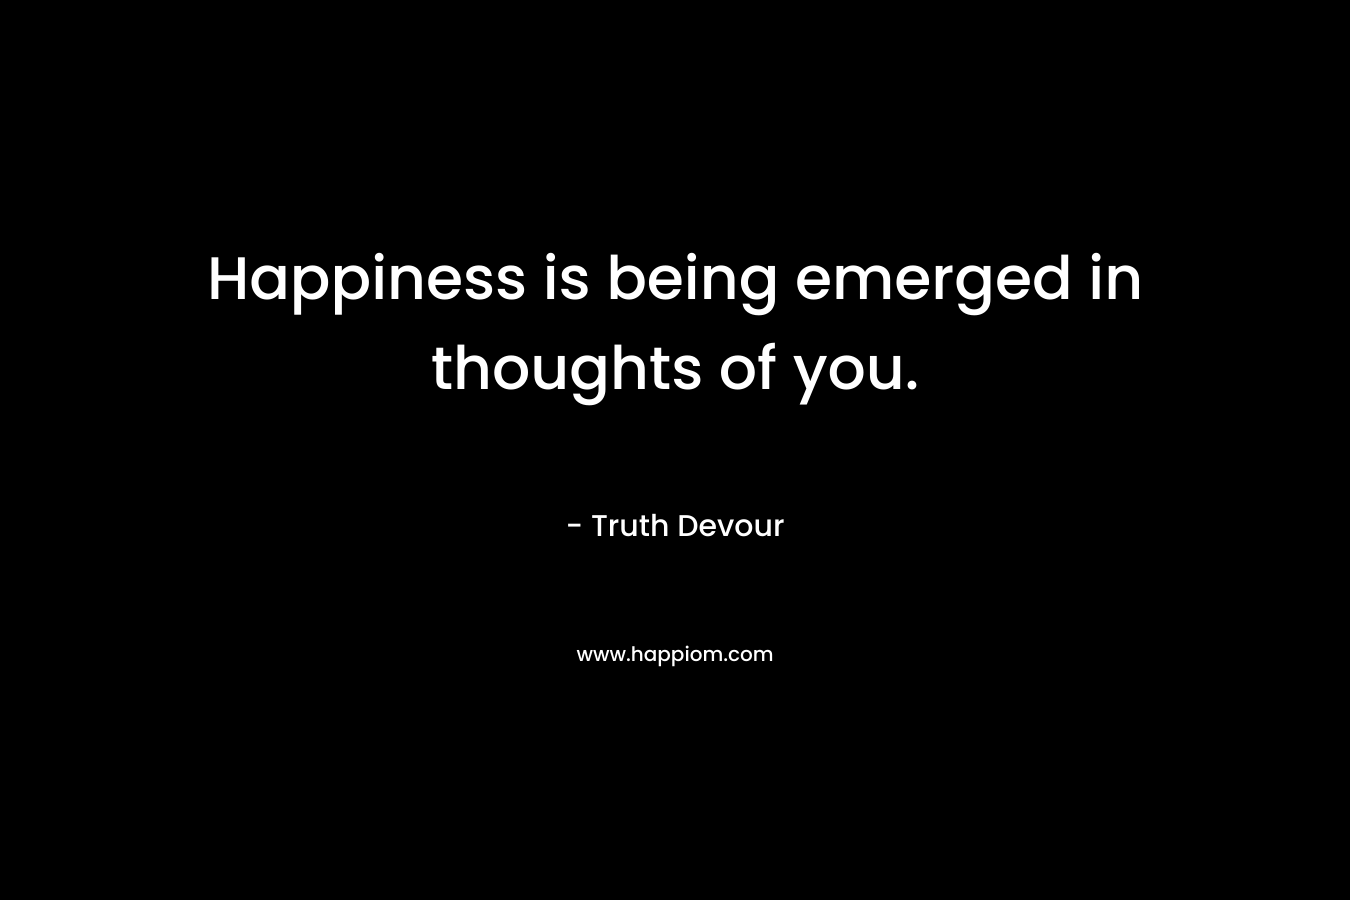 Happiness is being emerged in thoughts of you. – Truth Devour